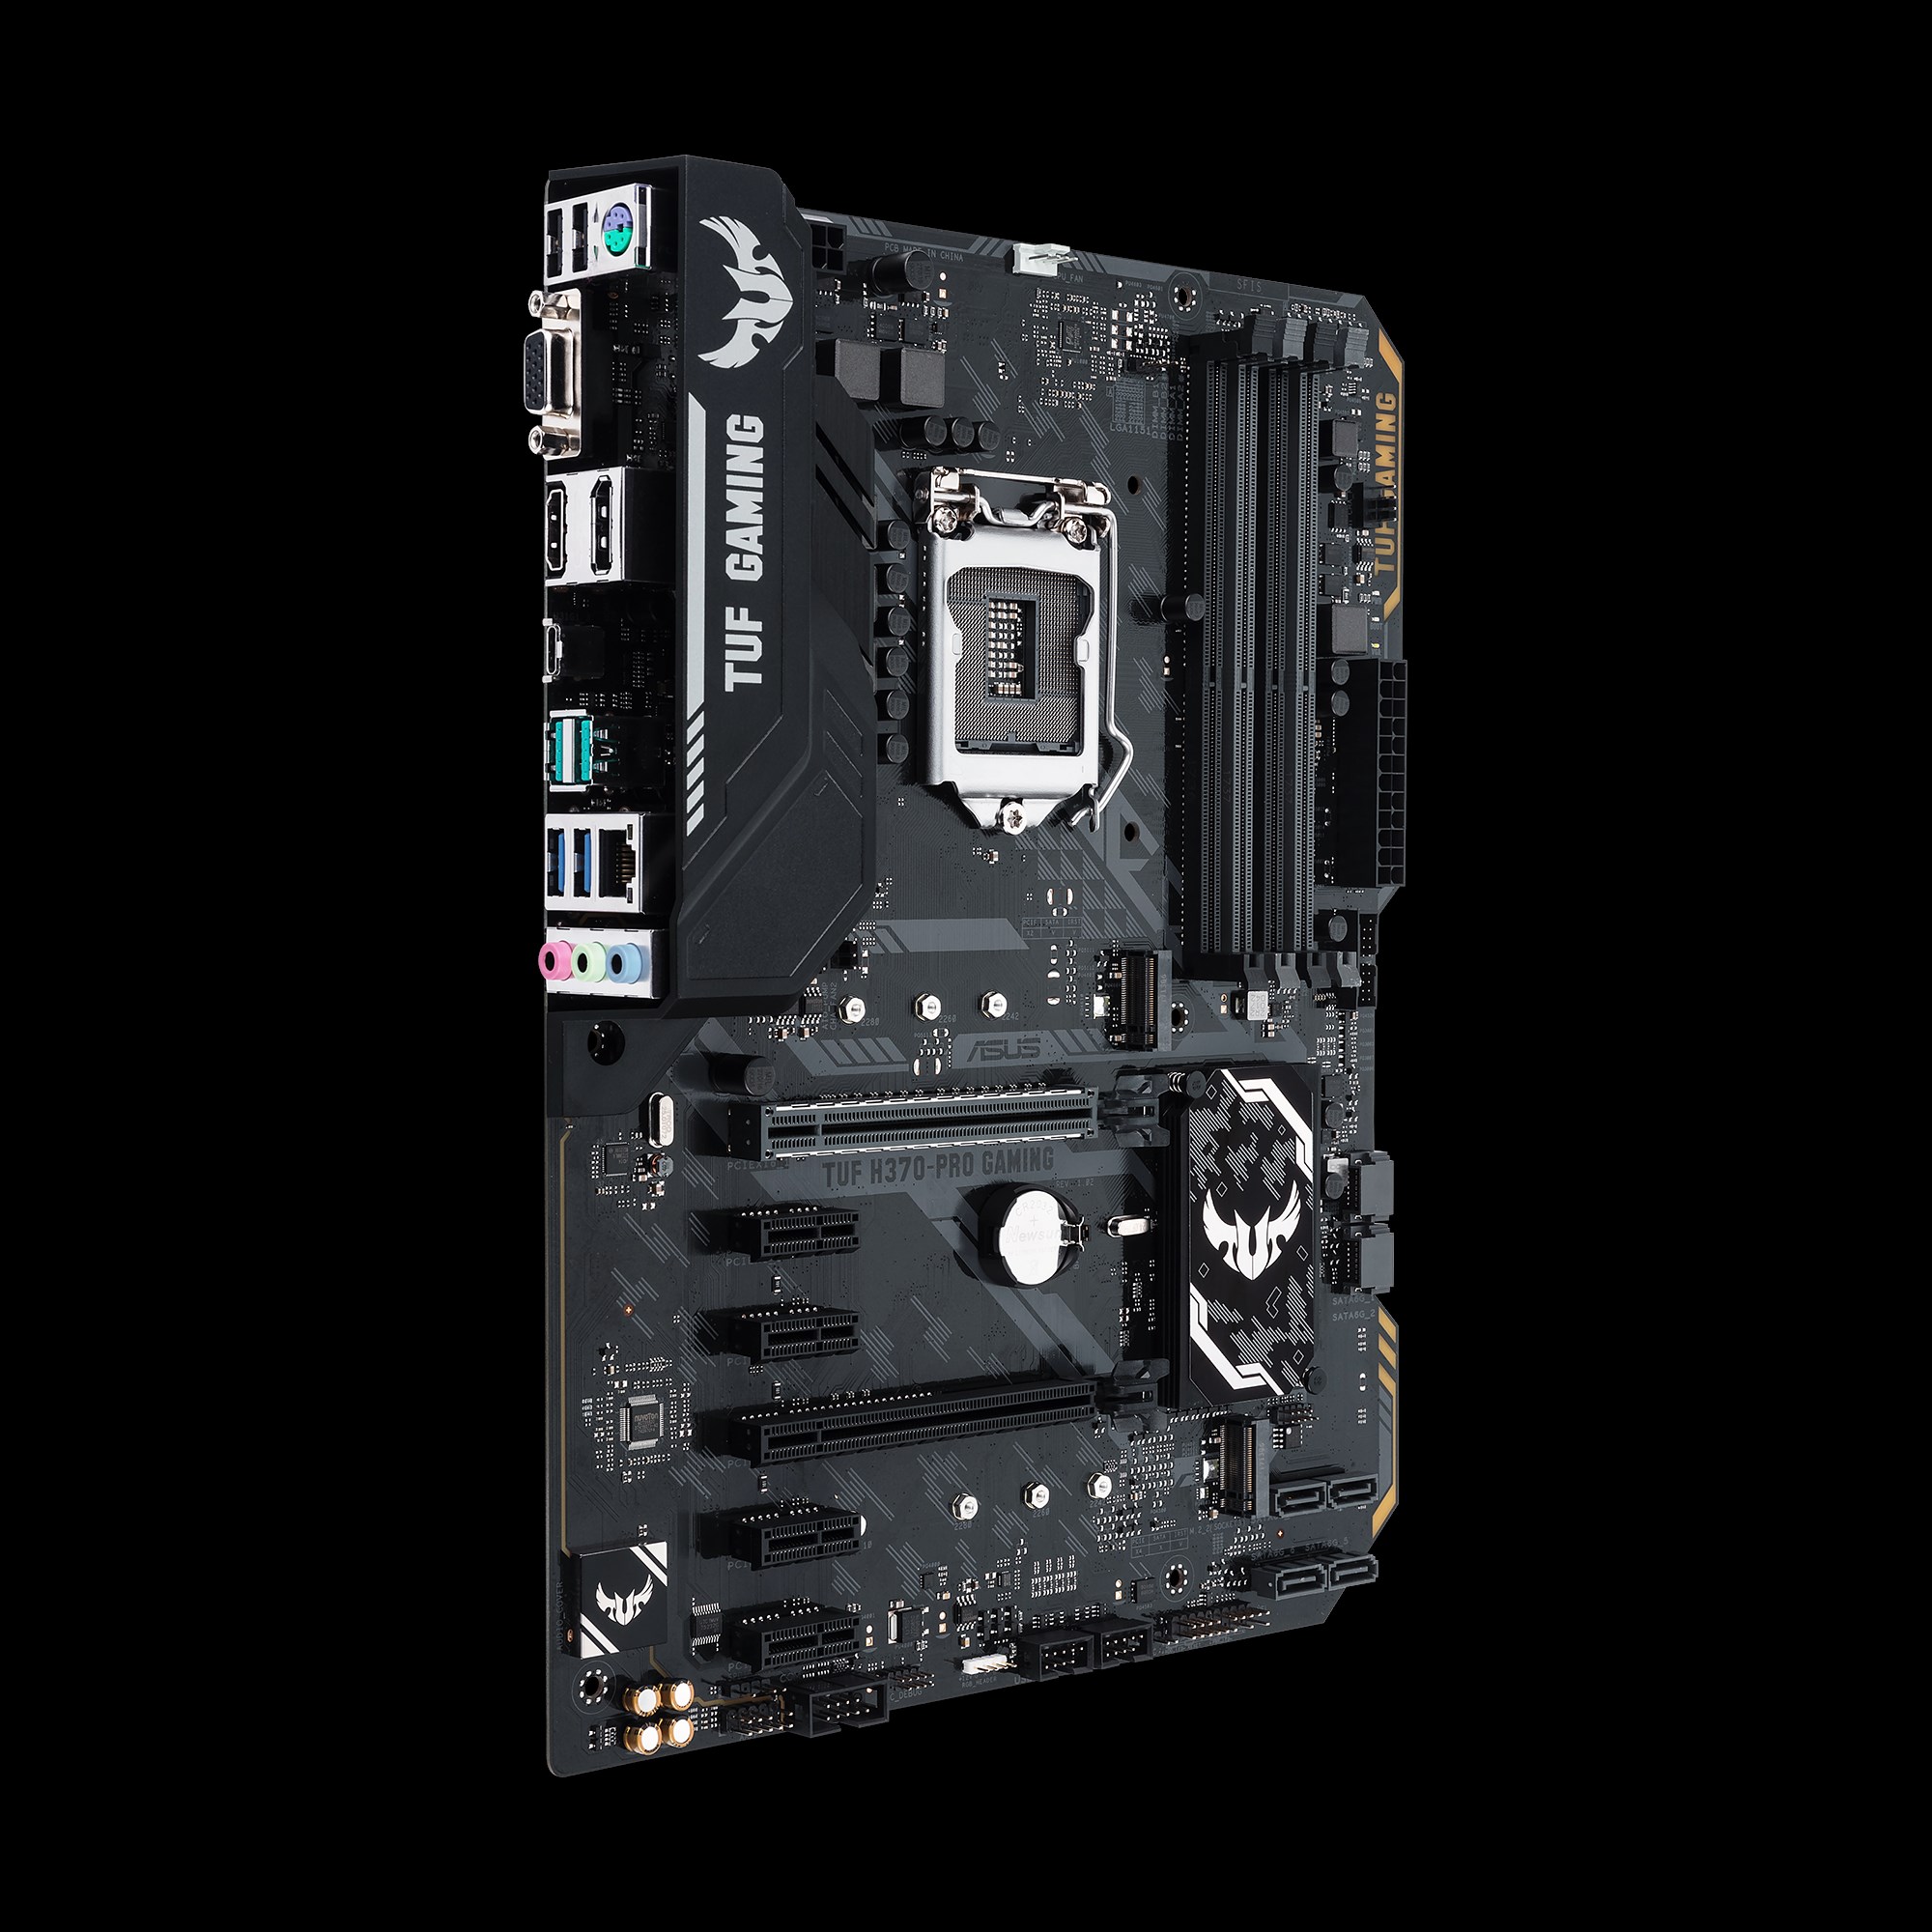 Asus Tuf H370 Pro Gaming Motherboard Specifications On Motherboarddb